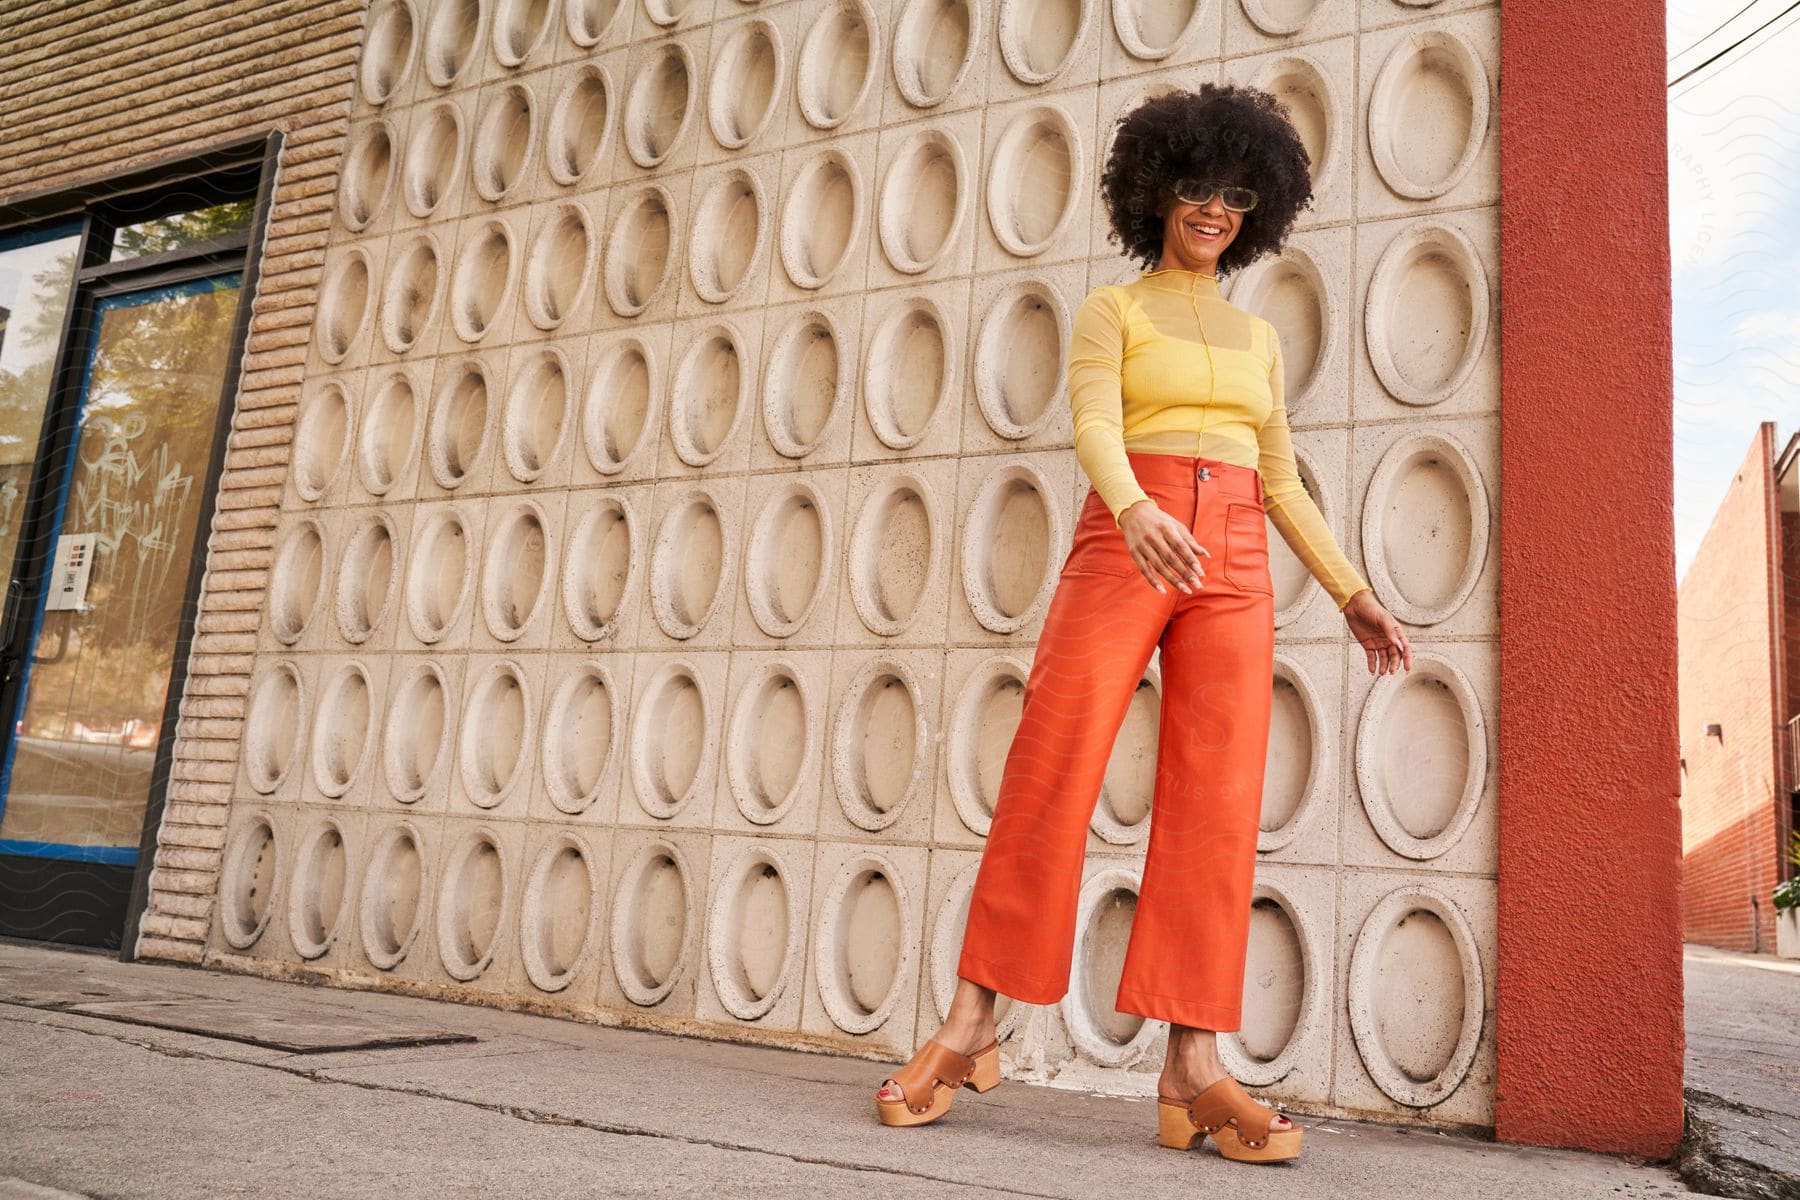 Woman with frizzy hair sunglasses yellow shirt and orange pants laughs in front of building’s wall